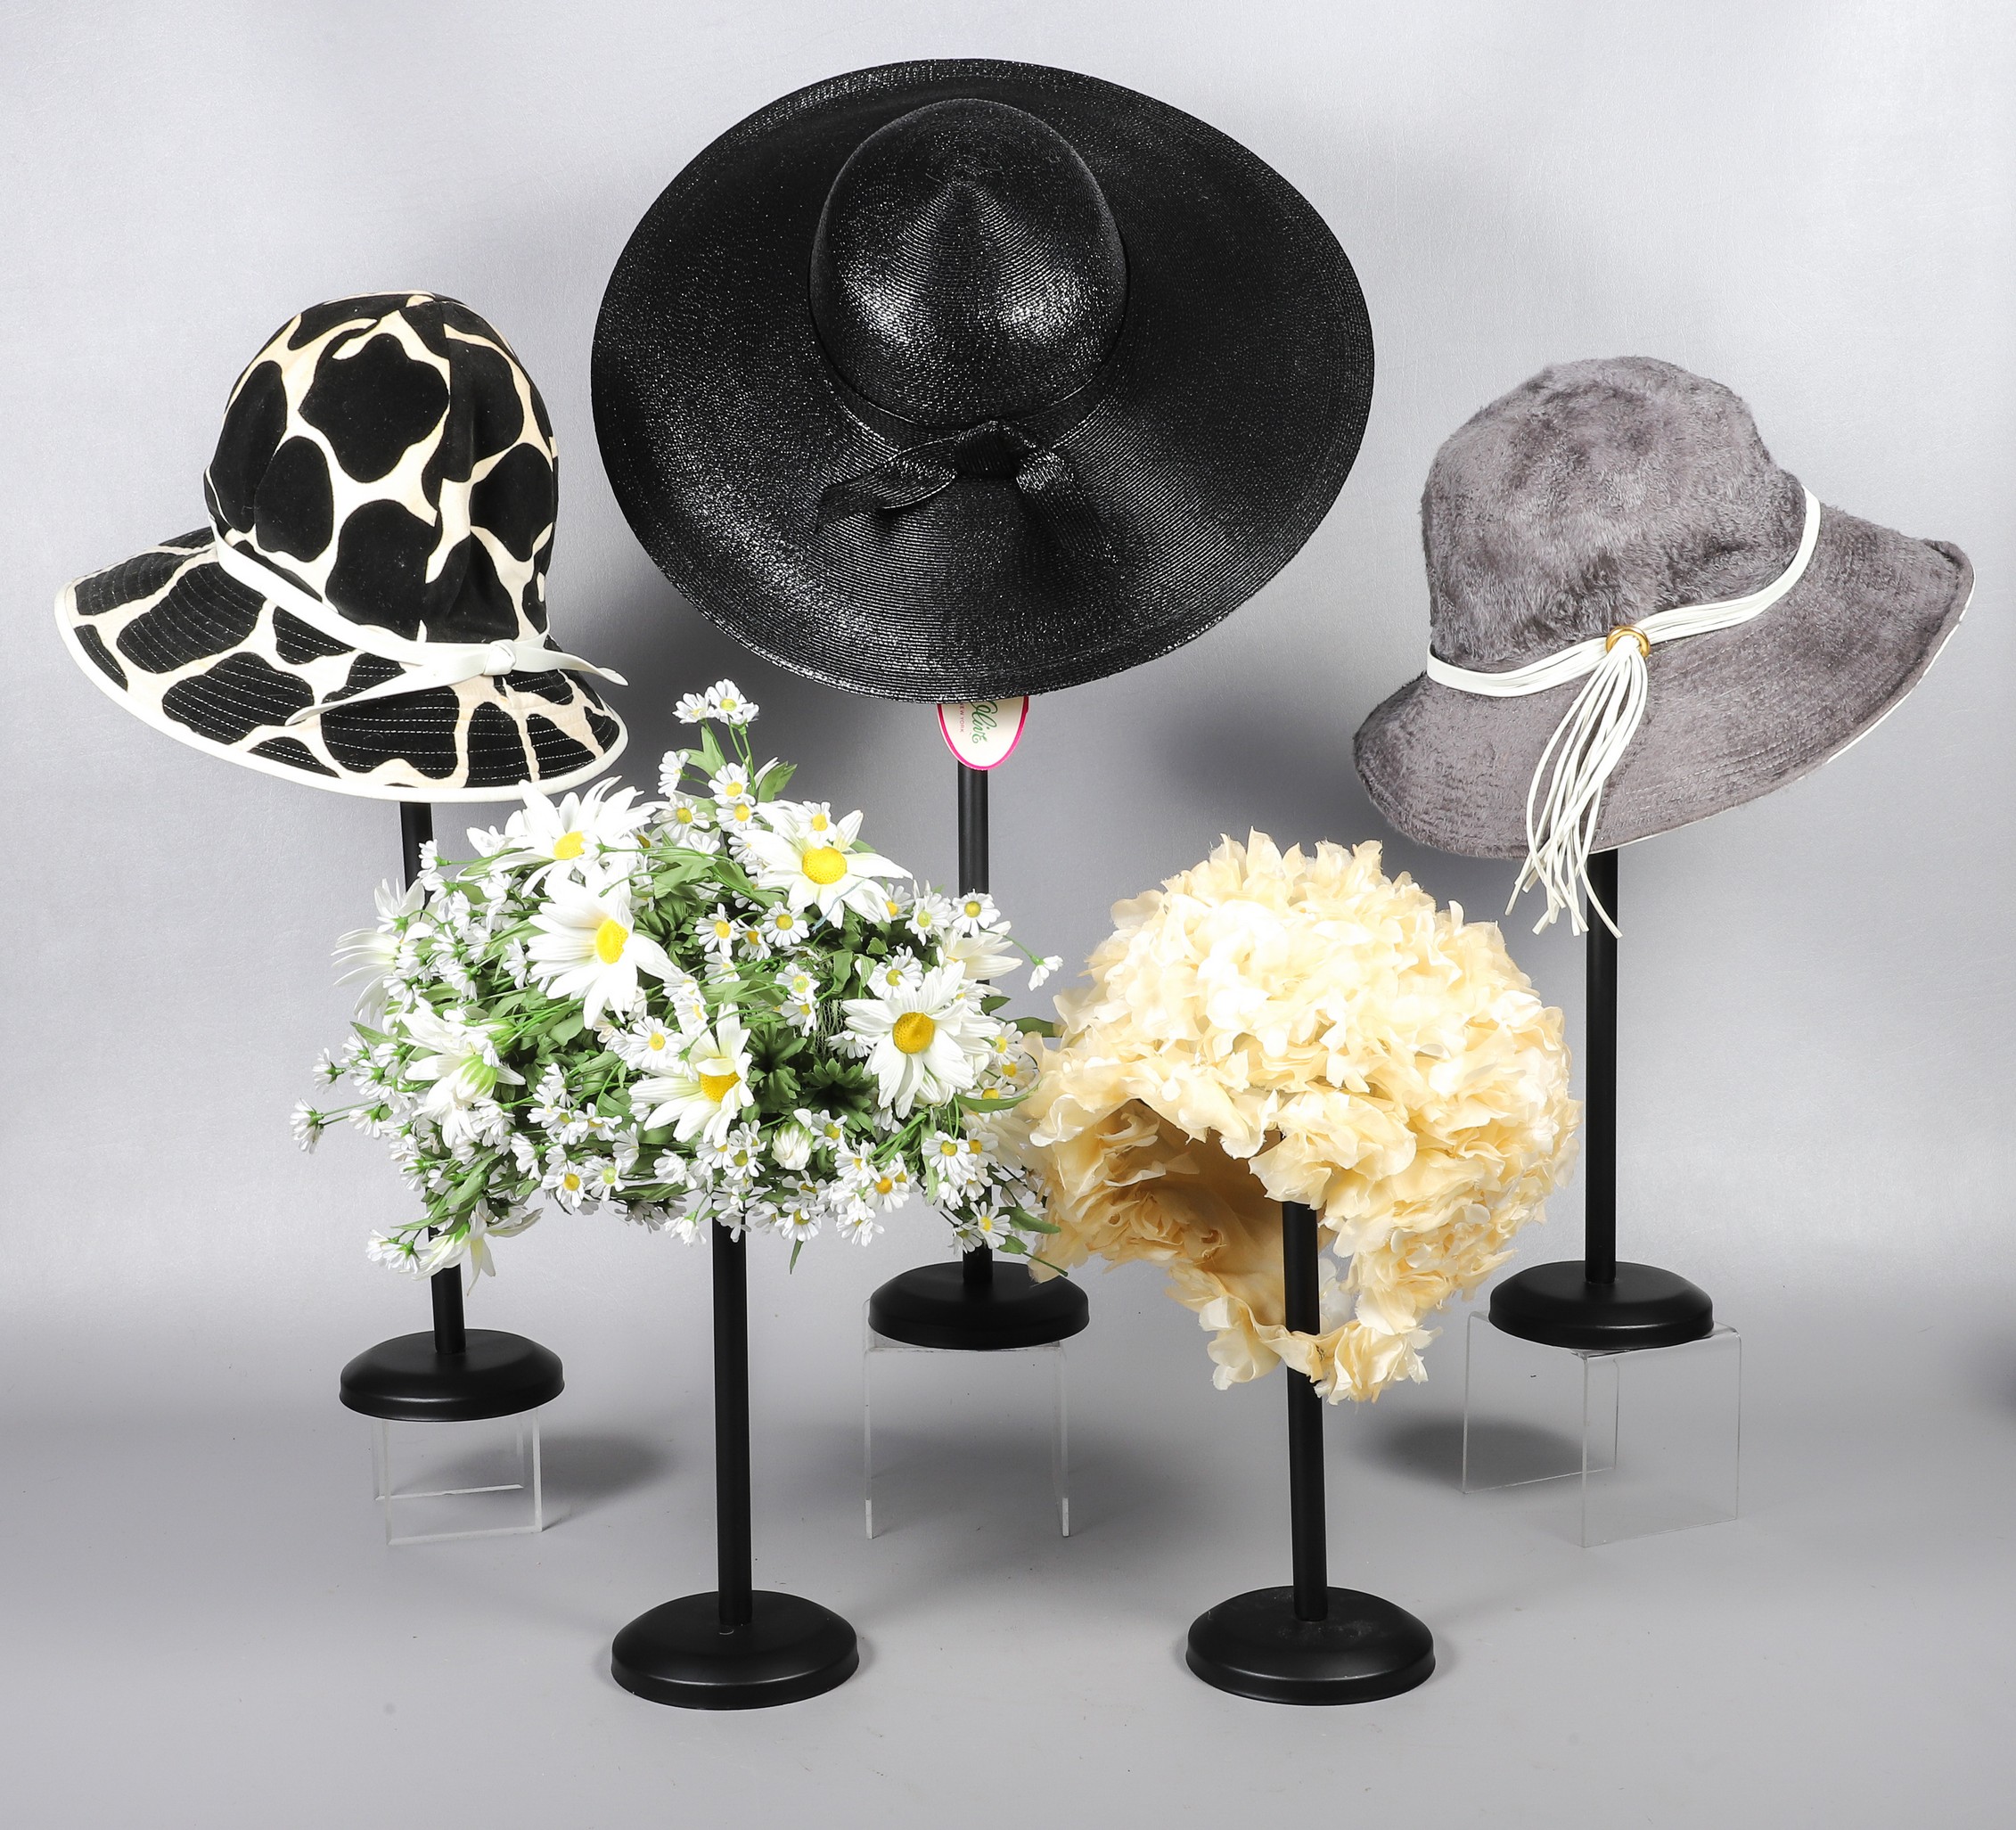  5 50 s 60 s Ladies hats to include 27a6b2